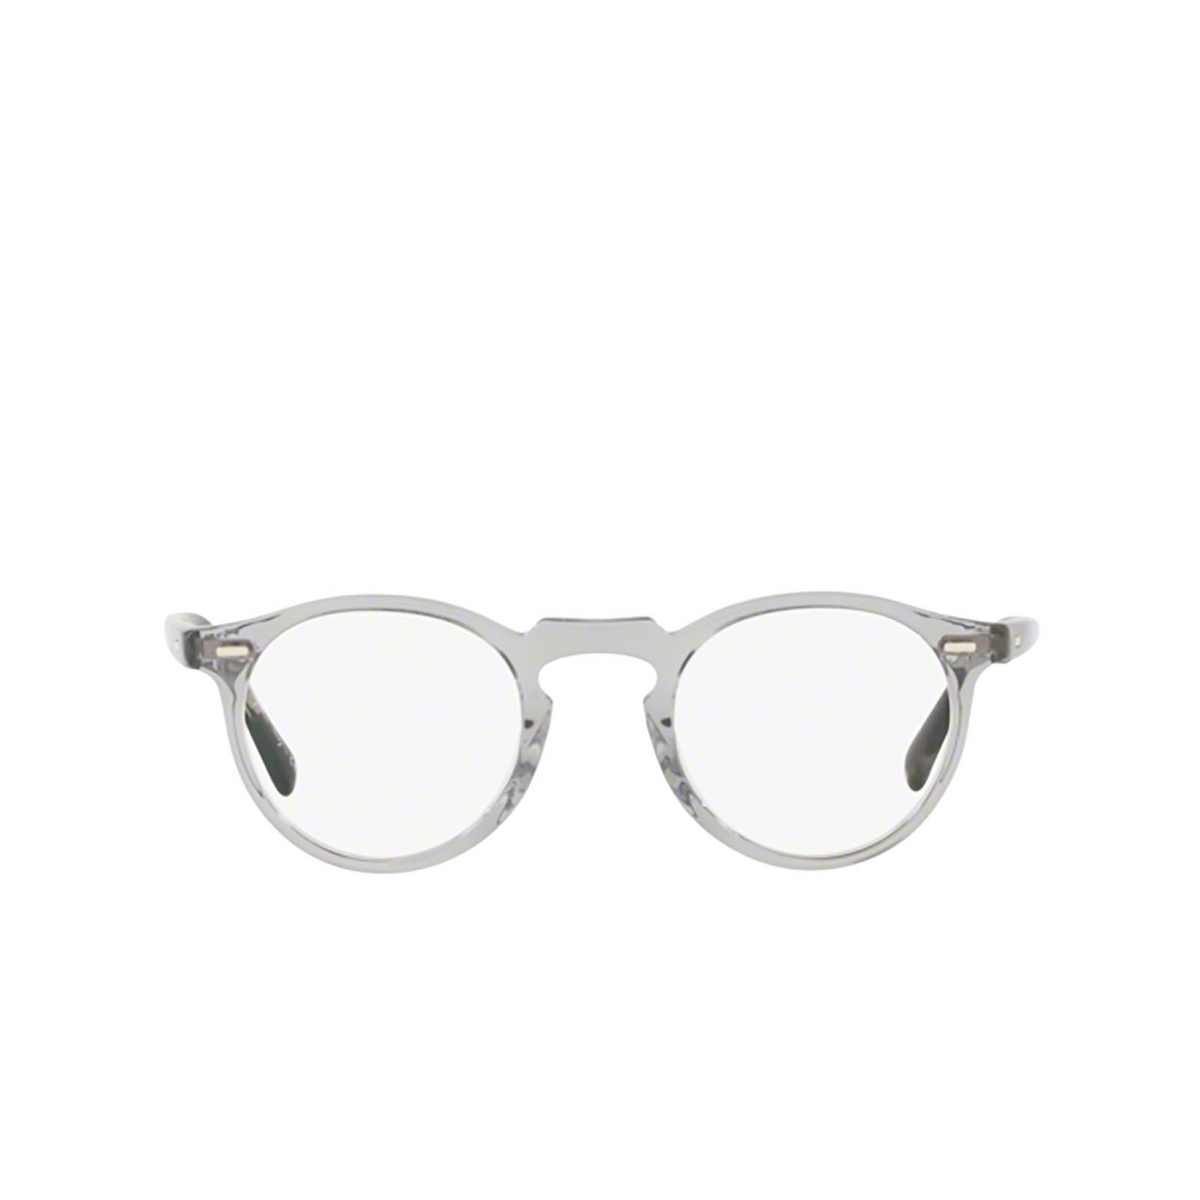 Oliver Peoples GREGORY PECK Eyeglasses 1484 Workman Grey - front view